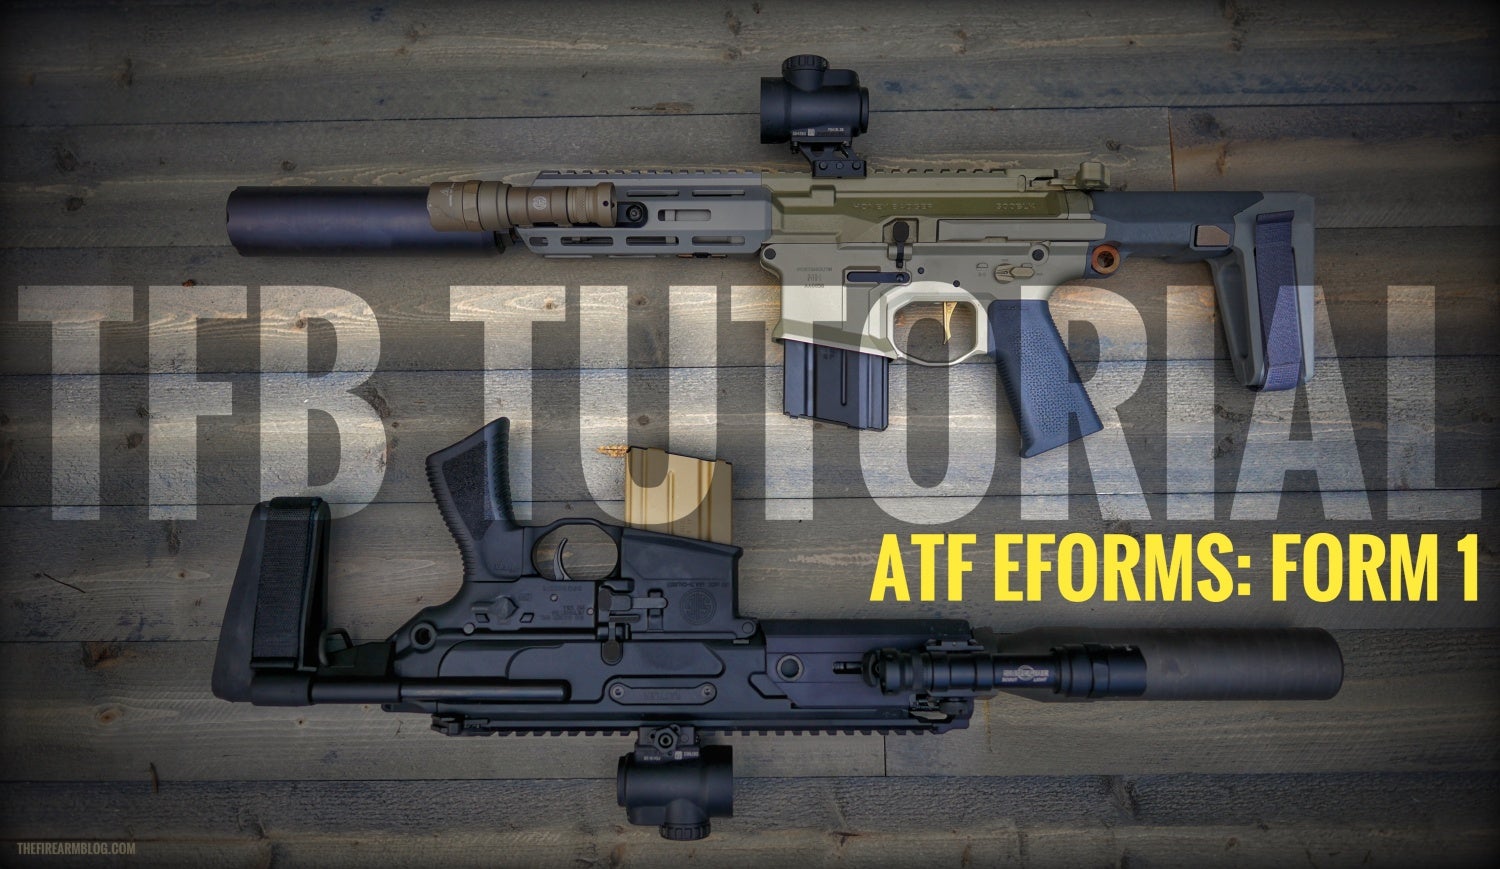 TFB TUTORIAL: Using The ATF Eforms NFA Application System -The Firearm Blog